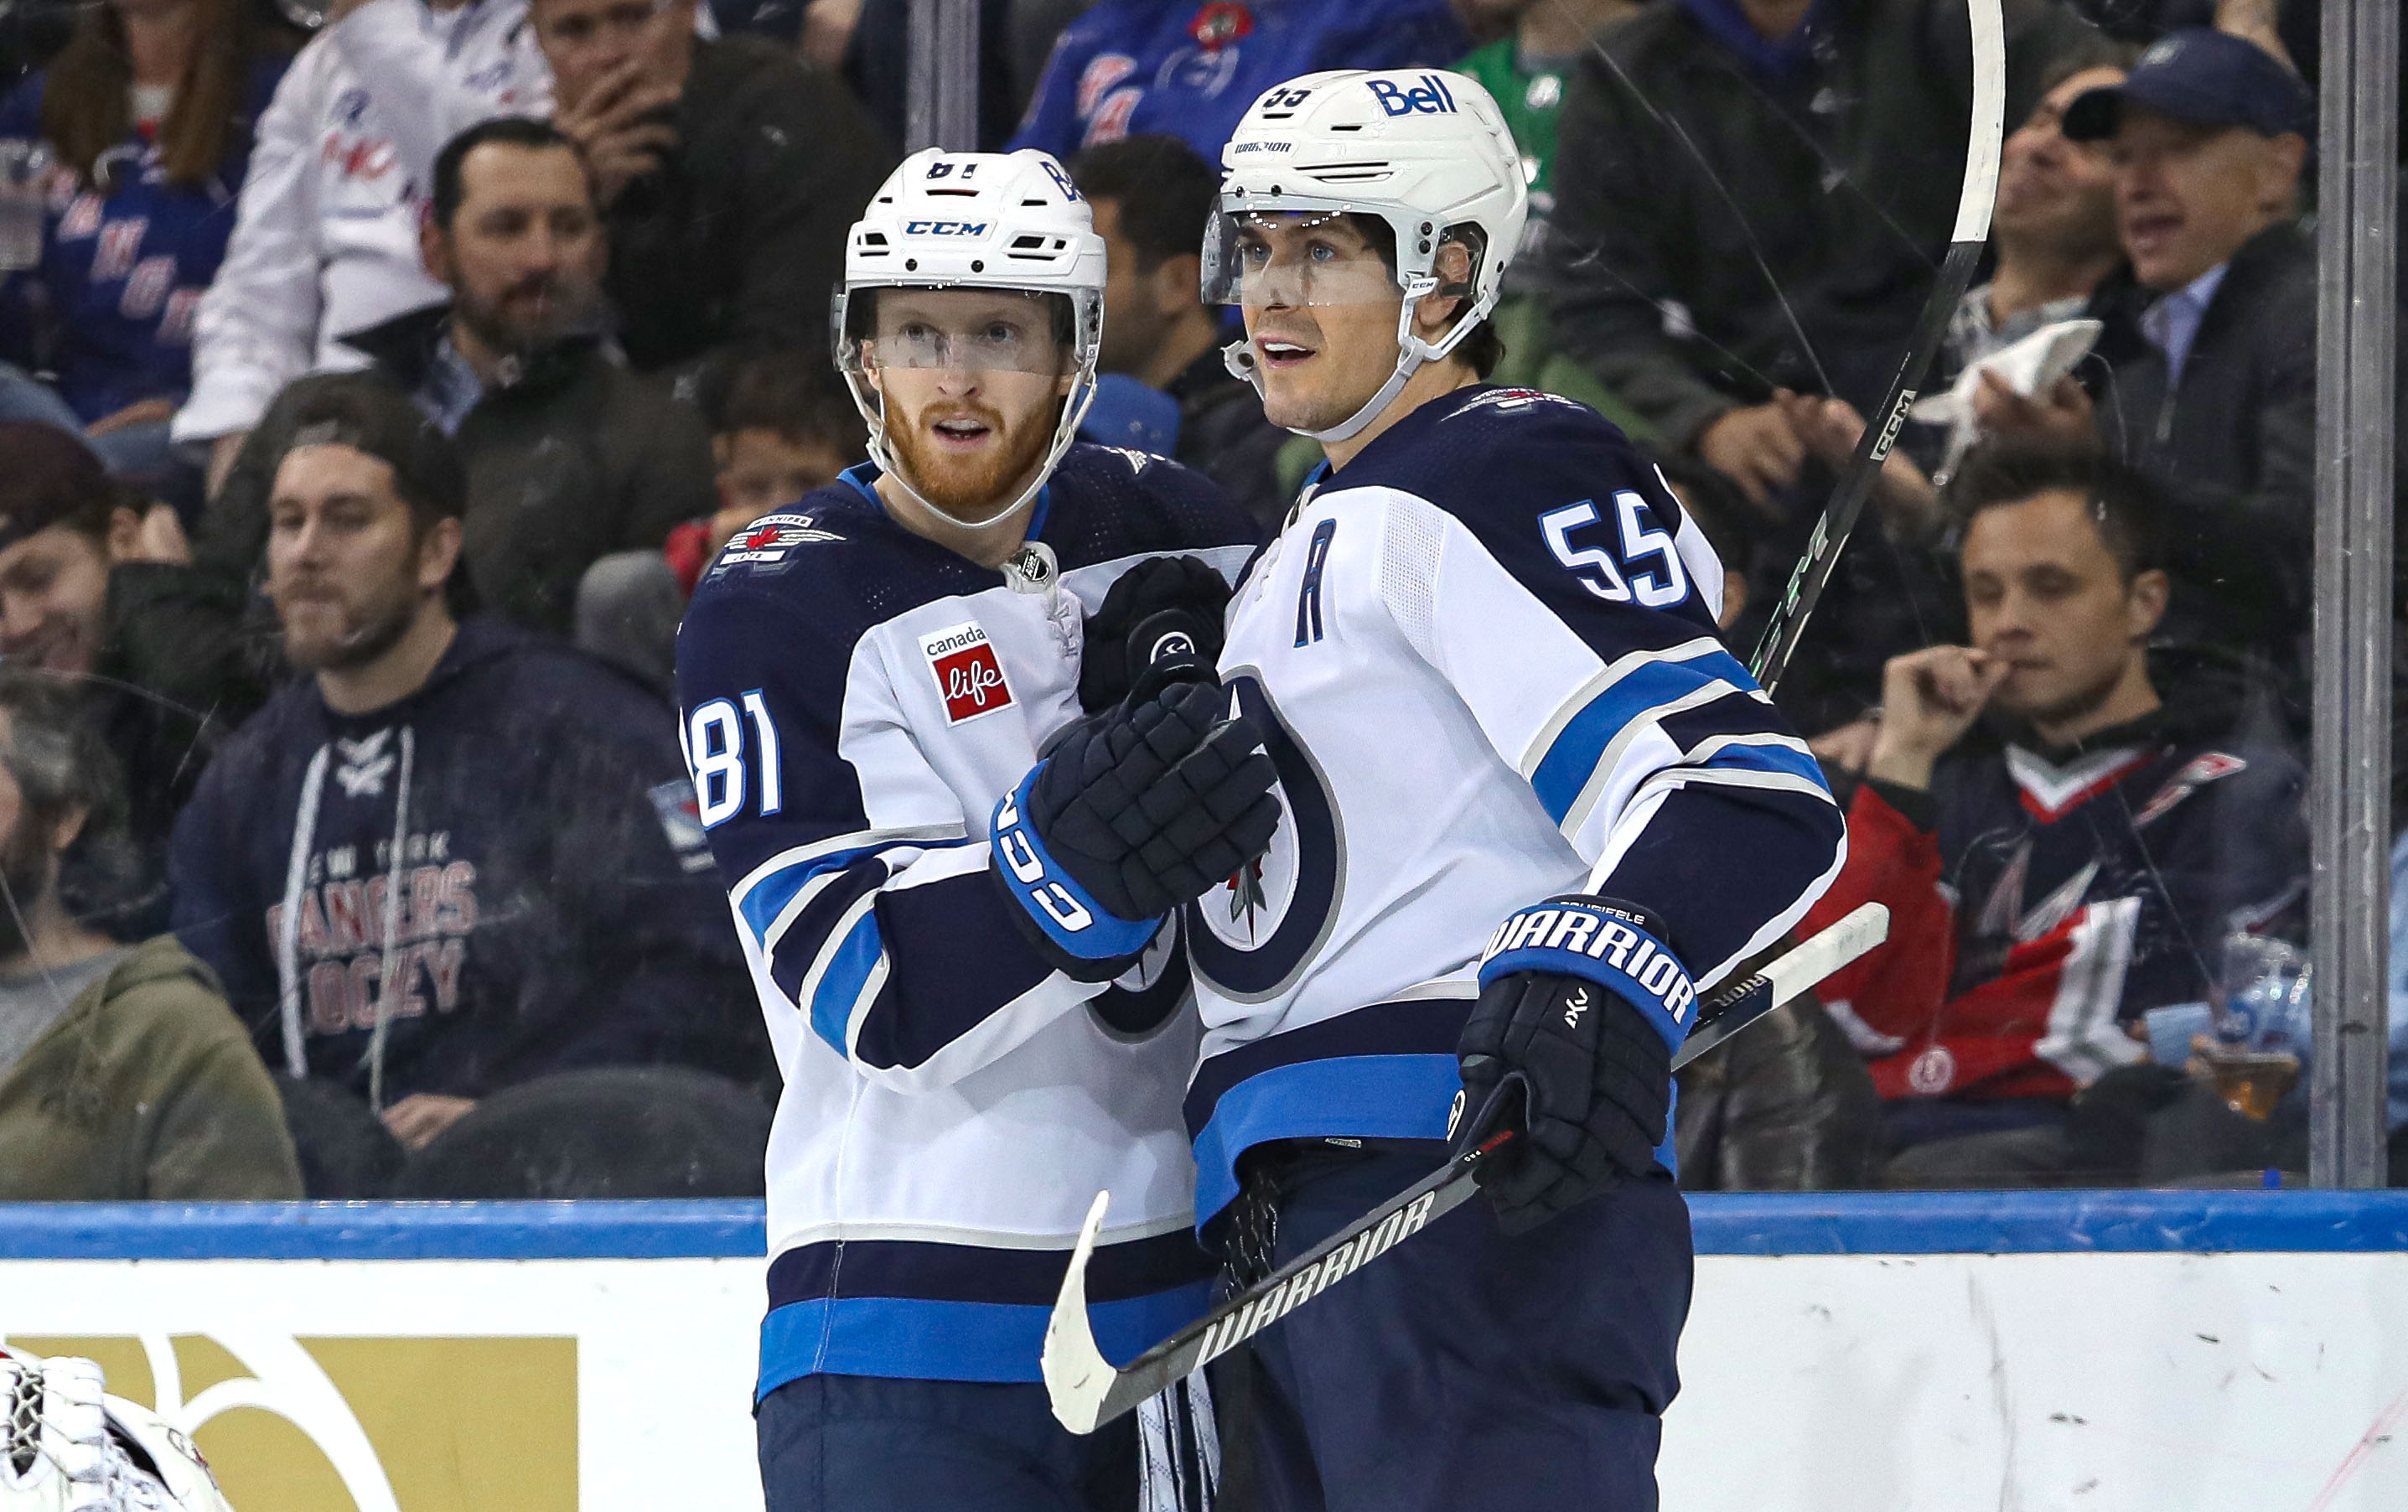 Scheifele nets hat trick as Jets beat Rangers 4-2 - The Globe and Mail